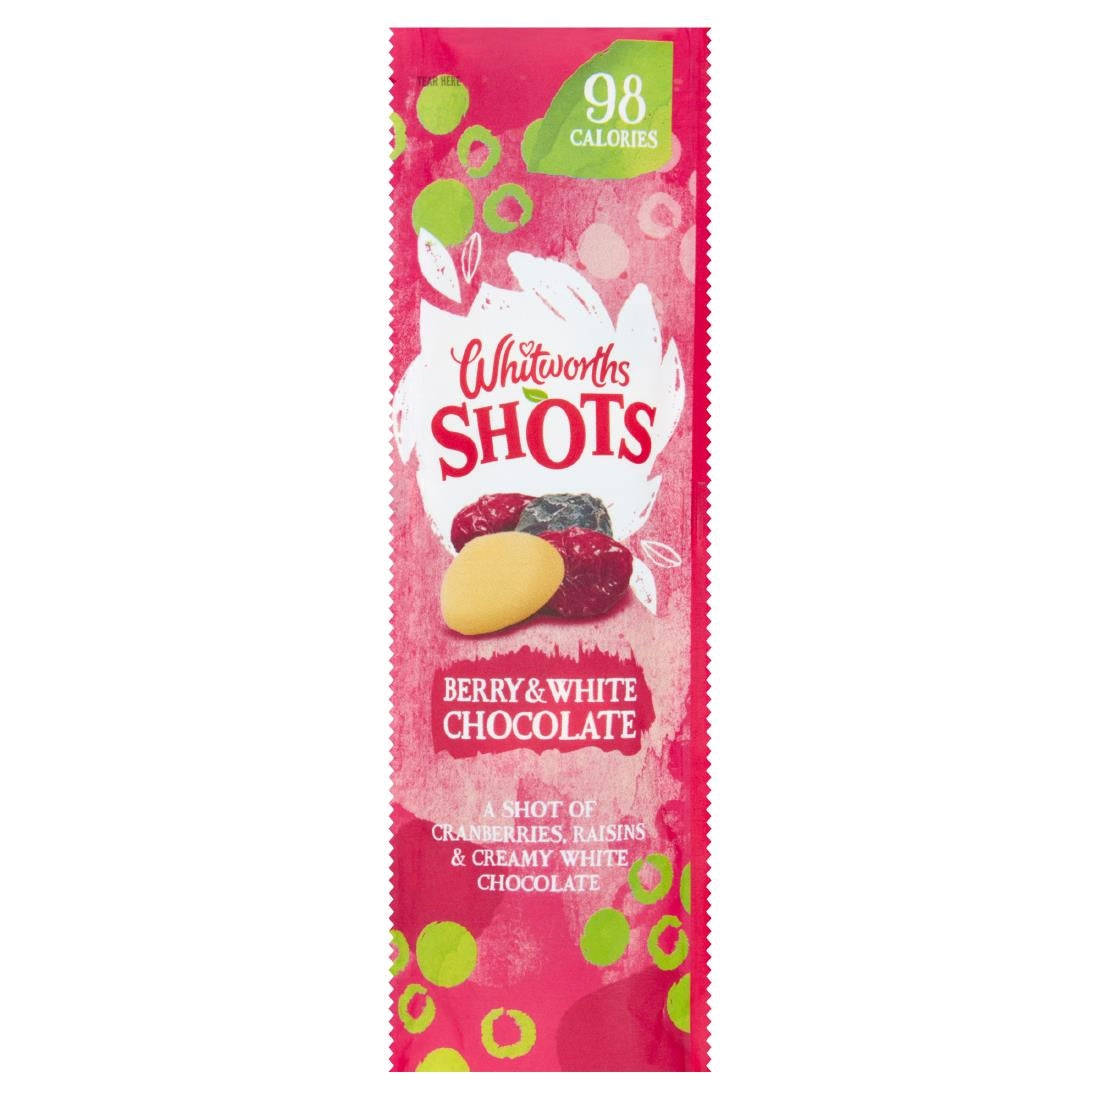 DZ489 Whitworths Berry and White Chocolate Shots 25g (Pack of 14)